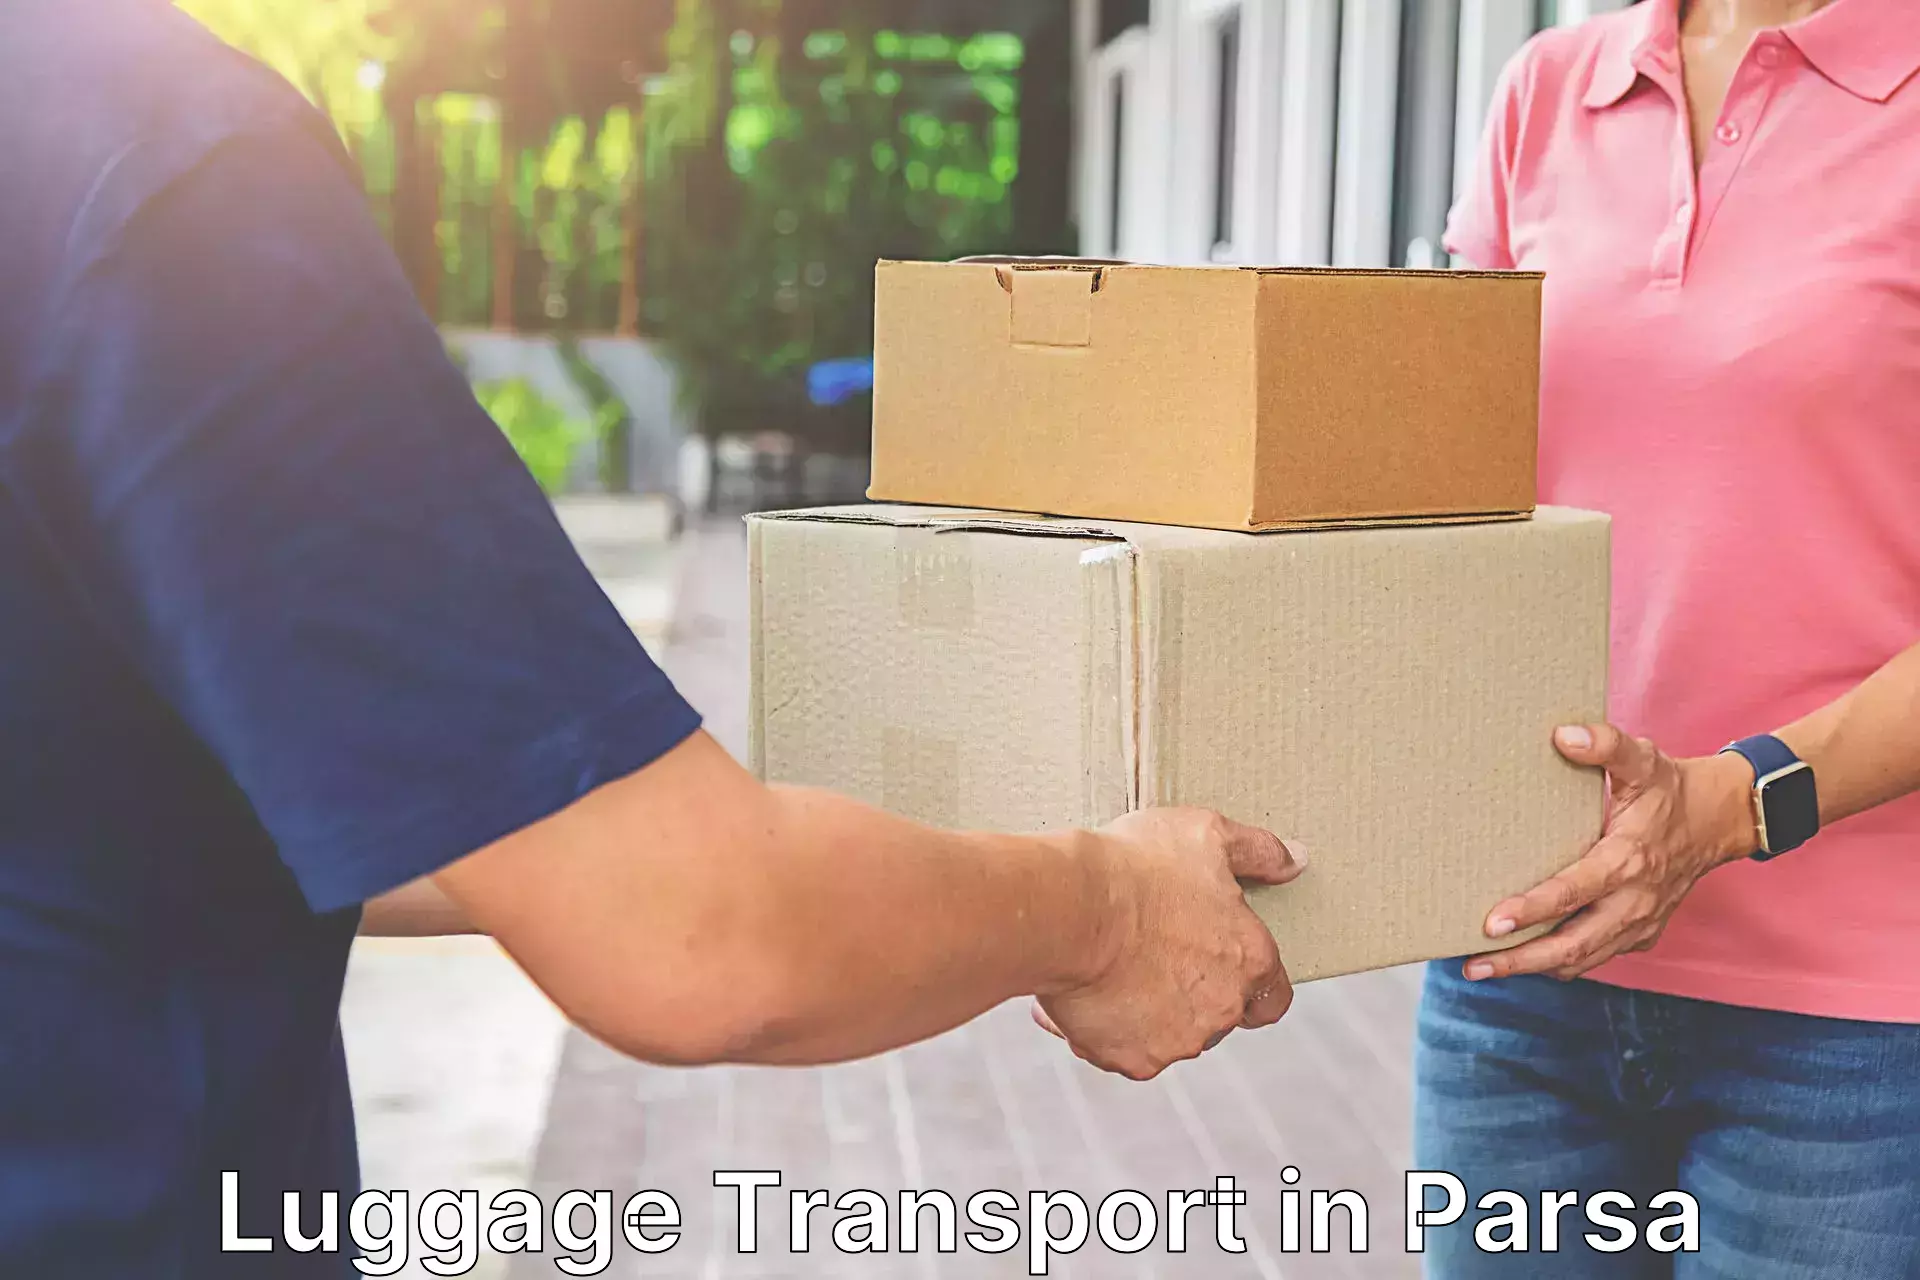 Personal luggage delivery in Parsa